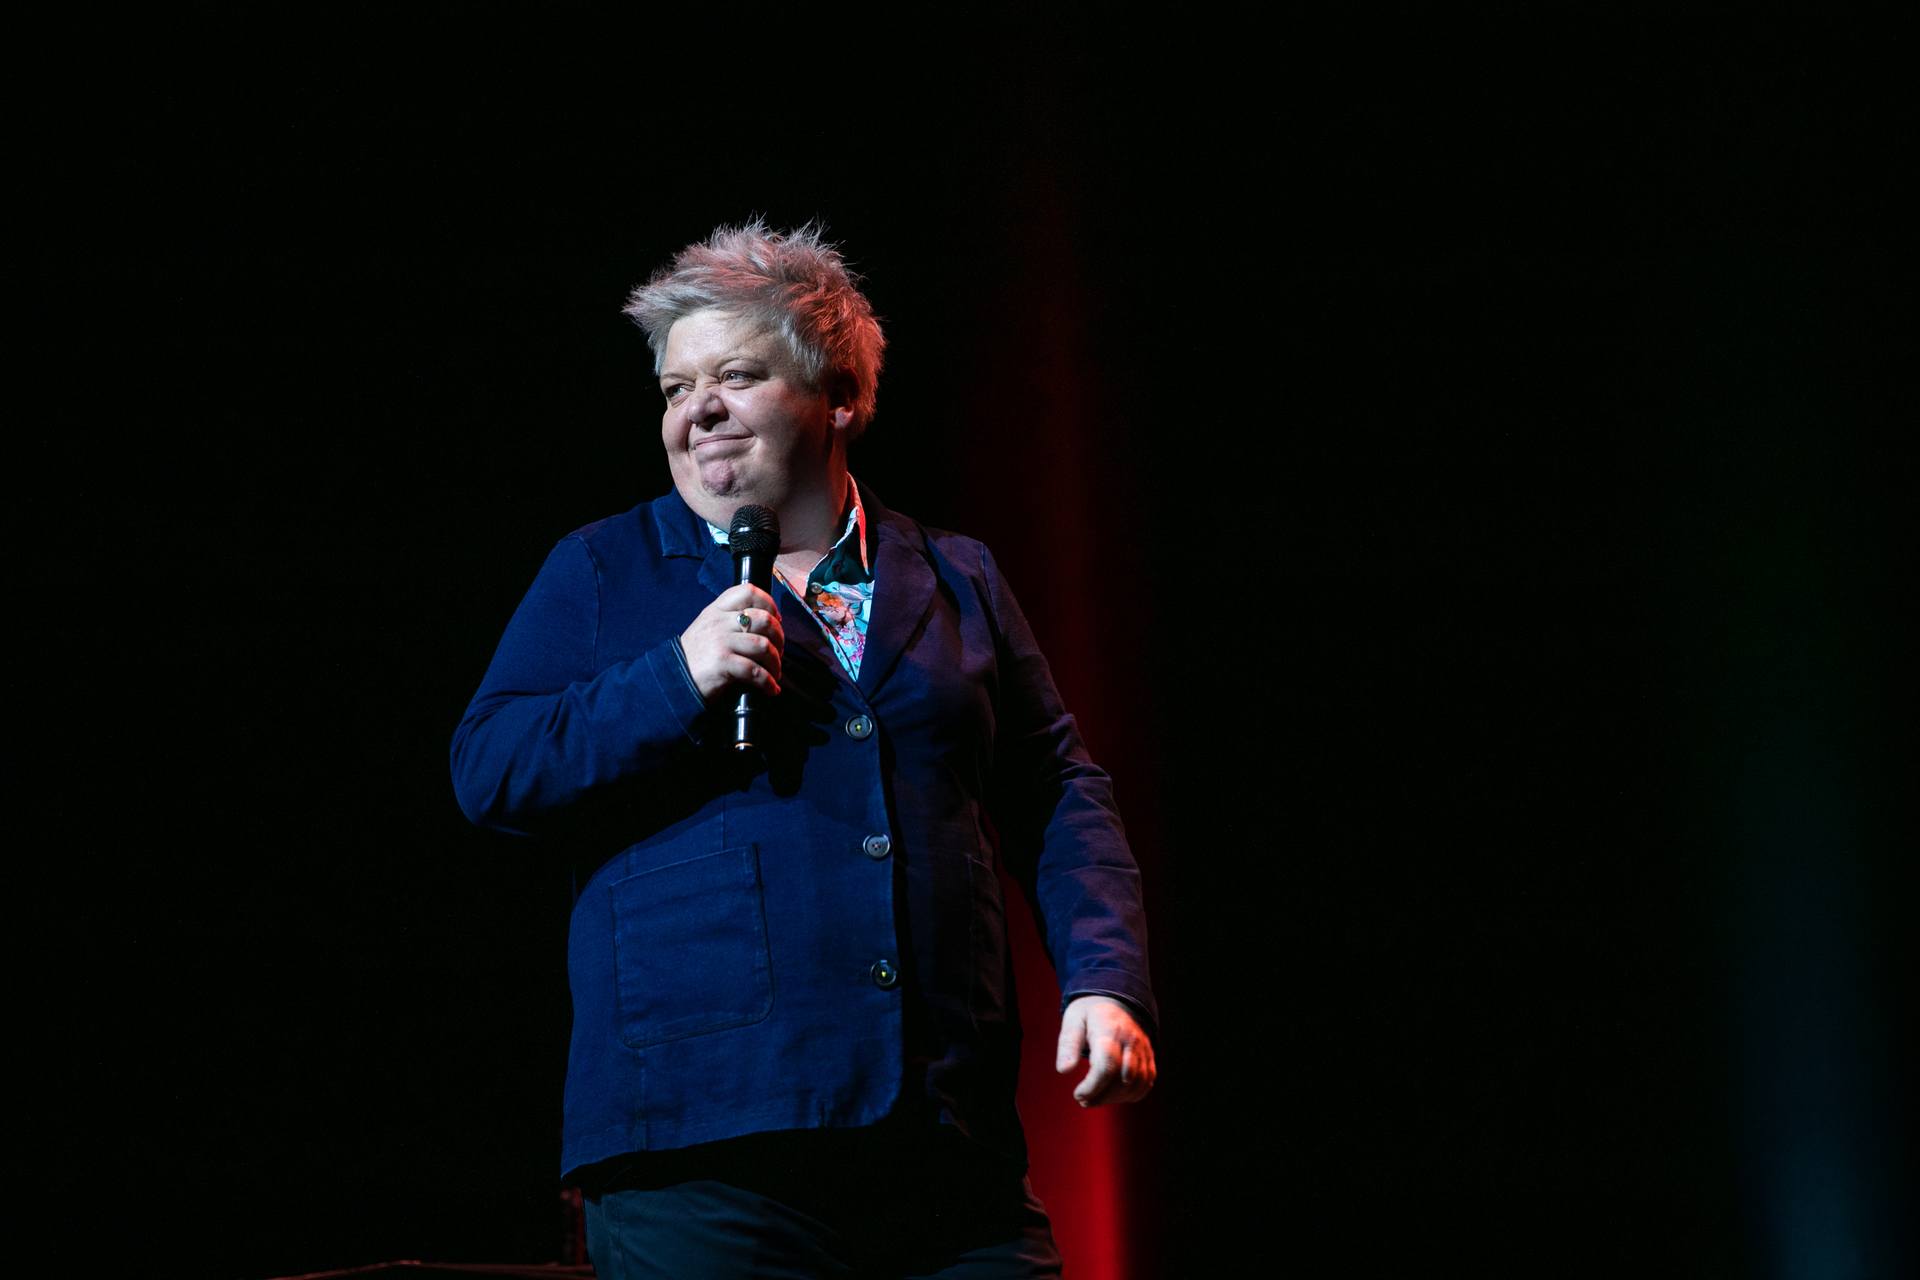 Susie McCabe performing at the Kings Theatre, Glasgow, for the Glasgow International Comedy Festival 2022.